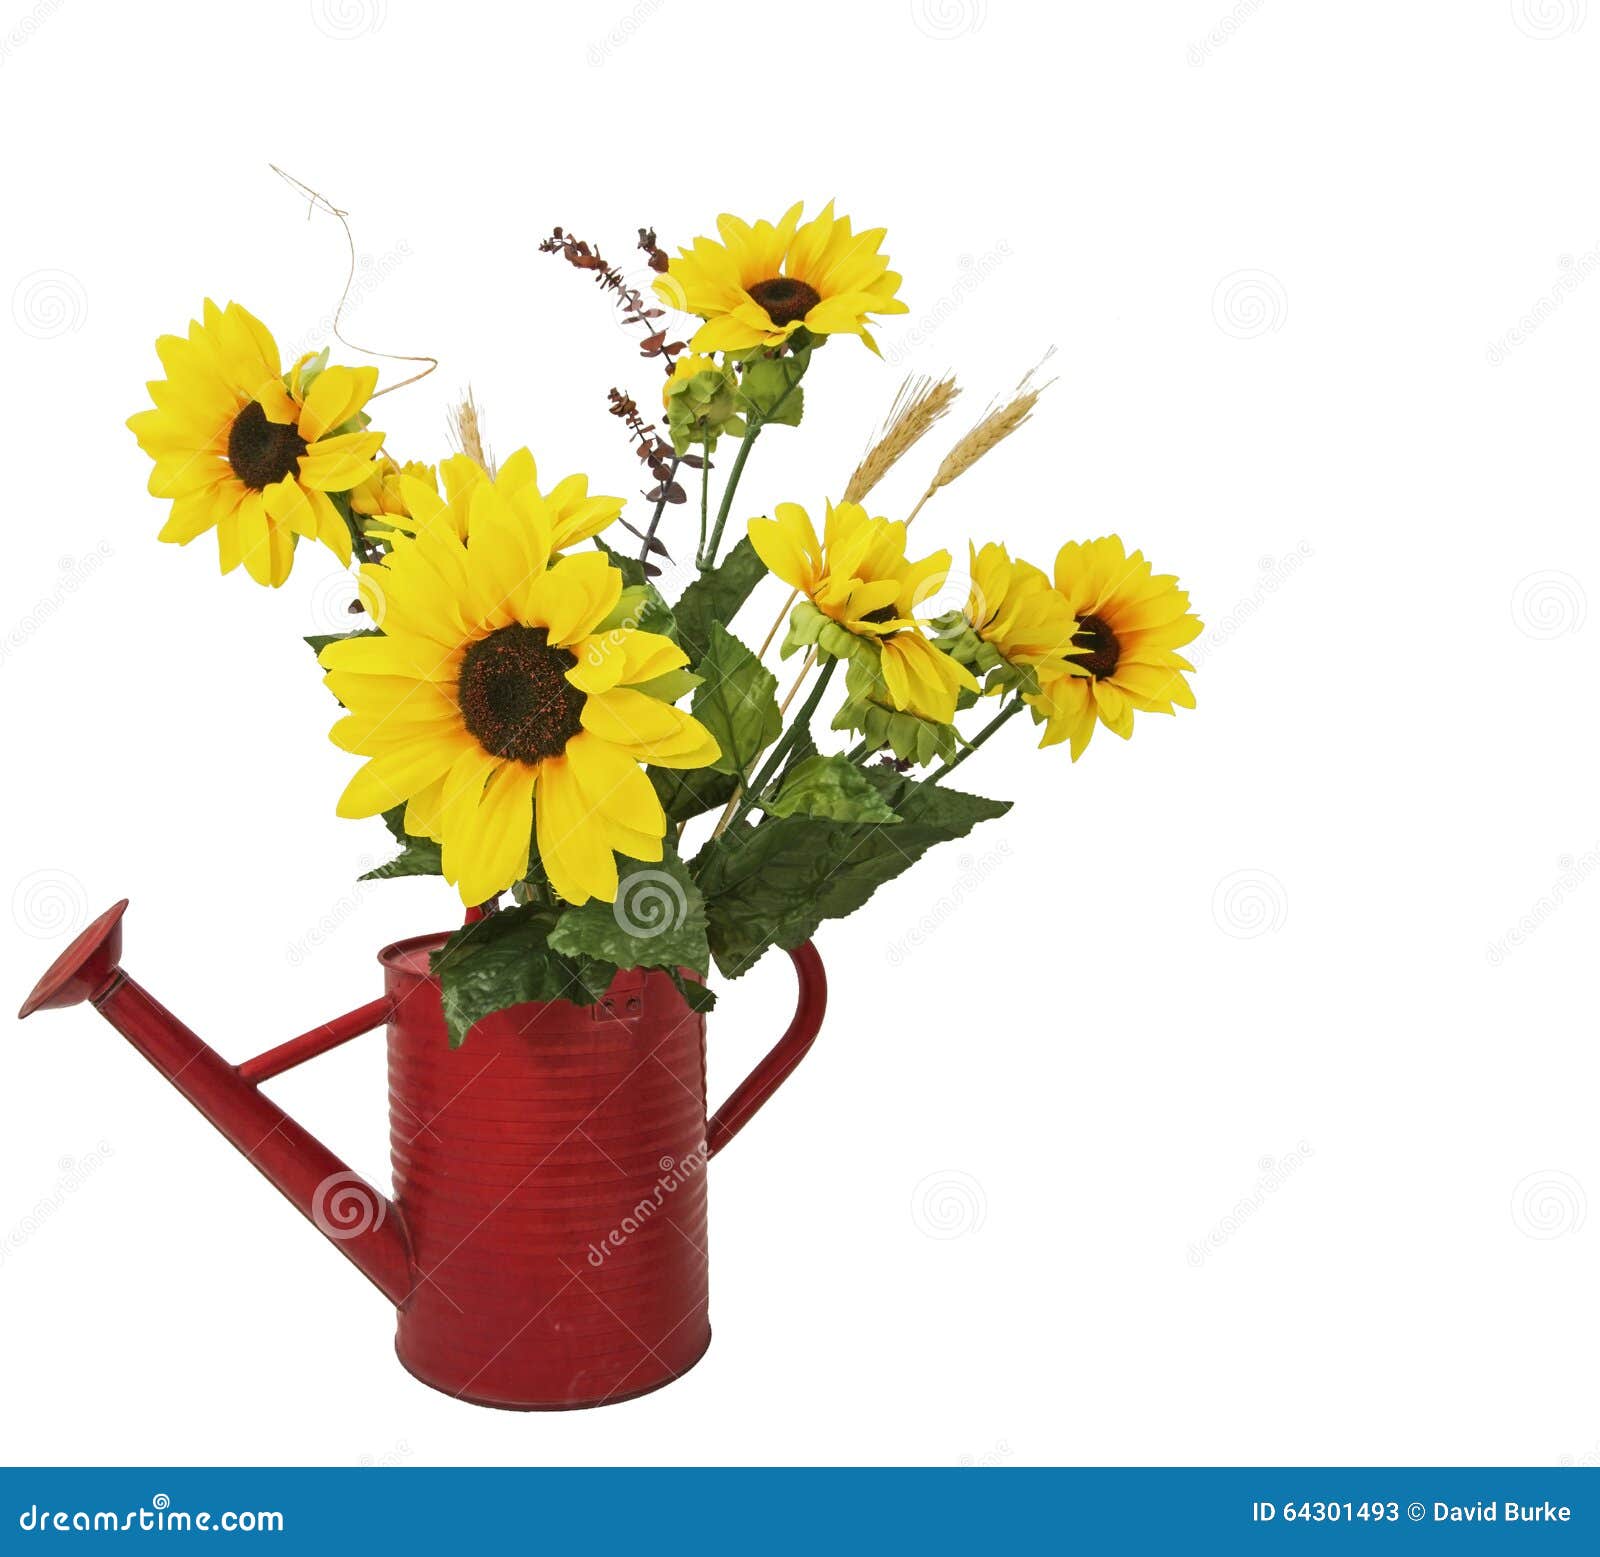 Sunflowers Watering Can White Isolated Cutout Stock Image - Image of ...